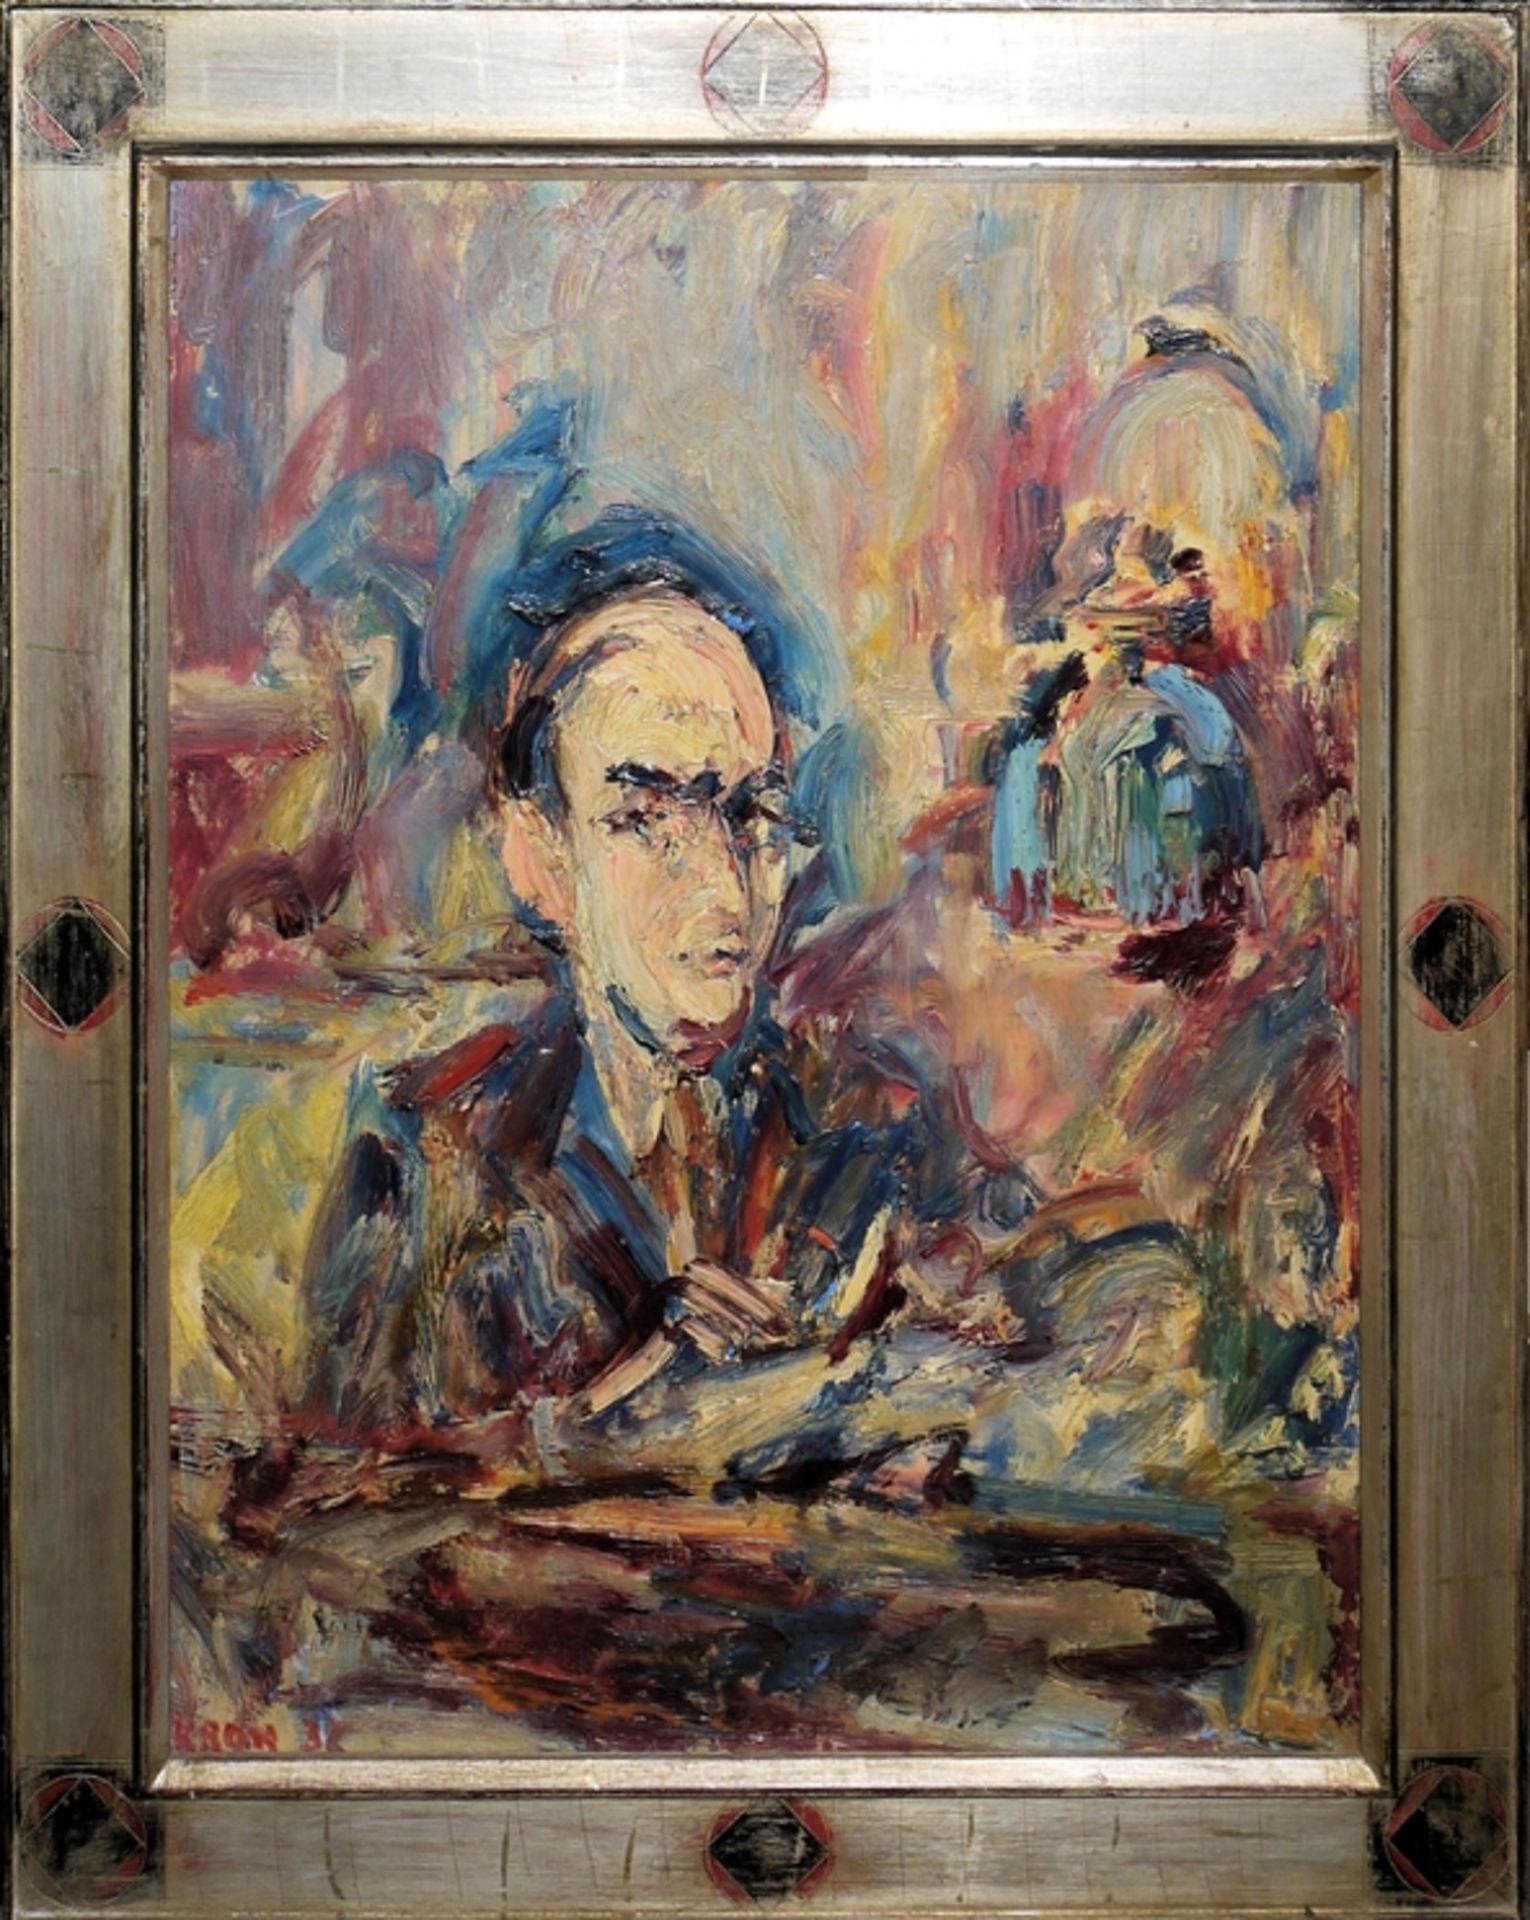 Paul Kron, Interior with a Reading Man, oil painting from 1932, in the original artist's frame